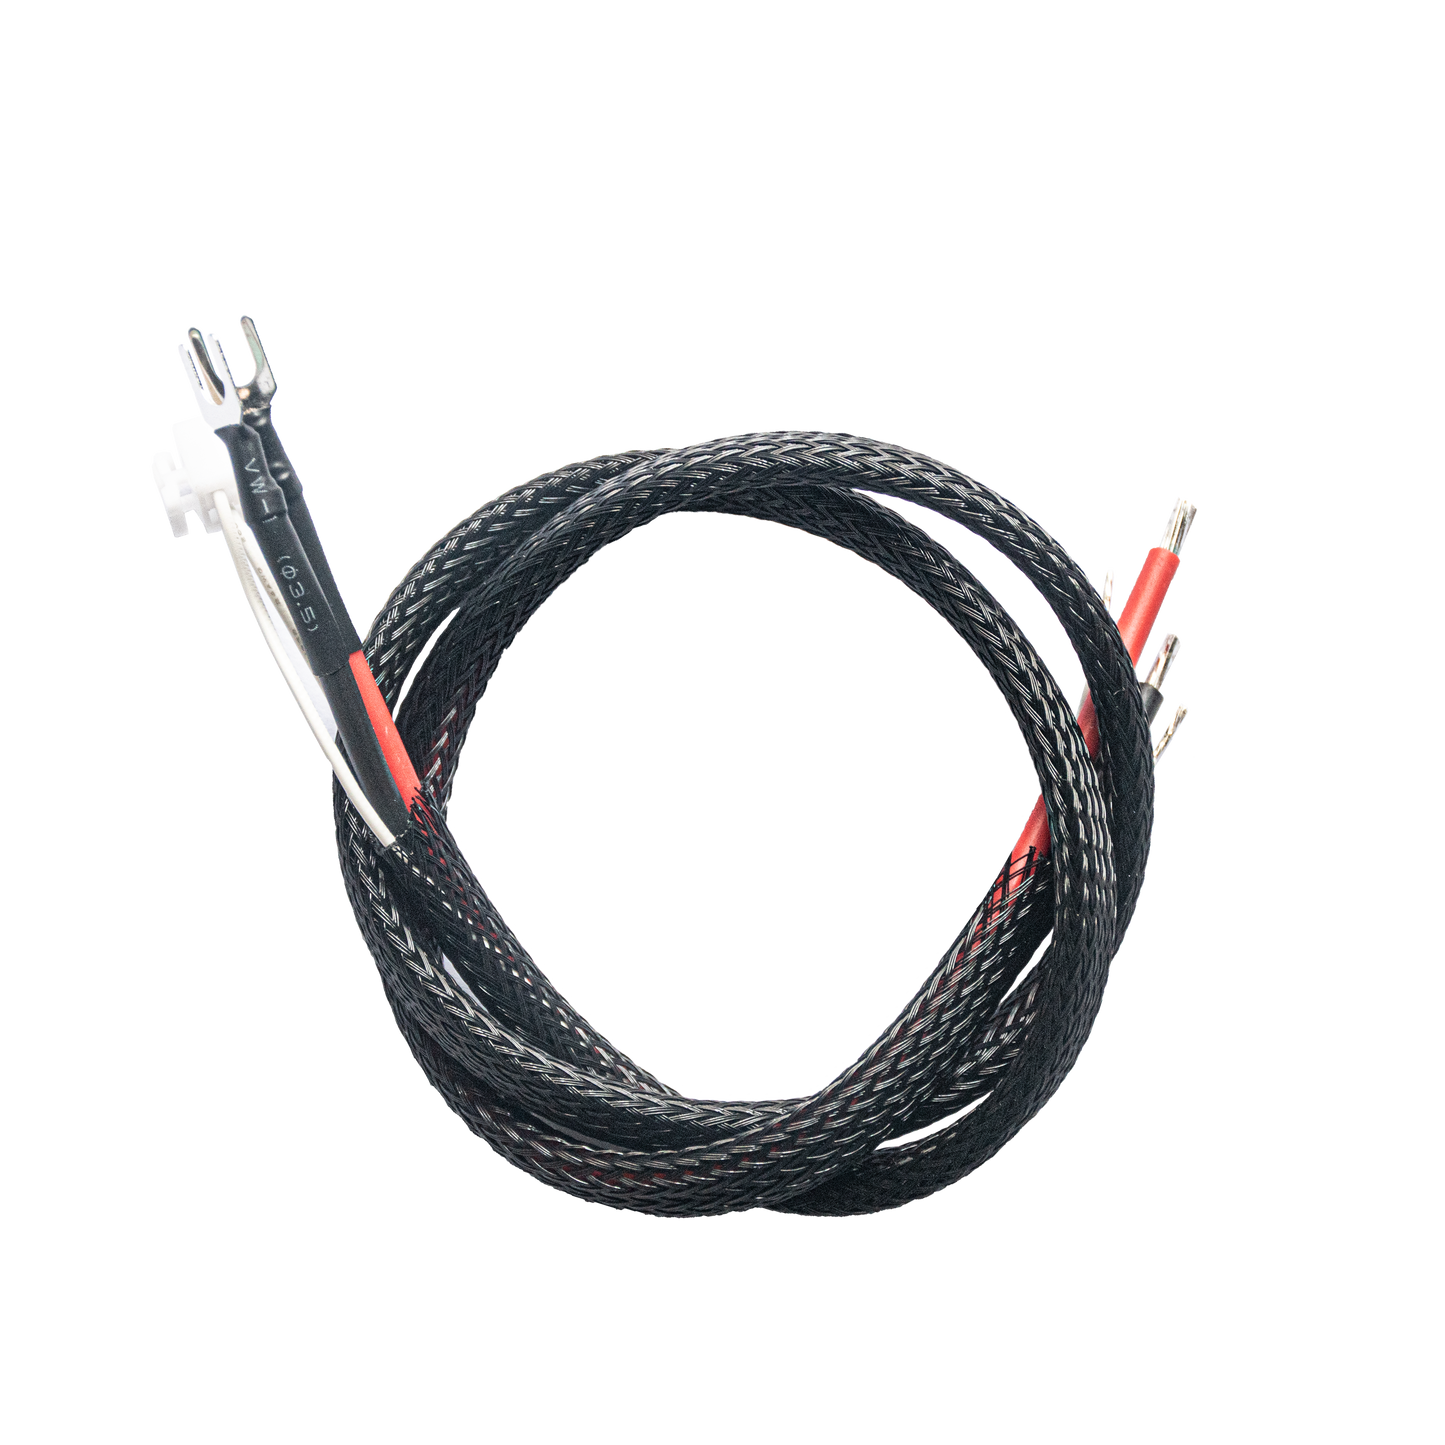 A Complete Set of Connecting Wires for Hands 2/Hands 2 Pro/TL-D3 Pro/TL-D5/TL-D6